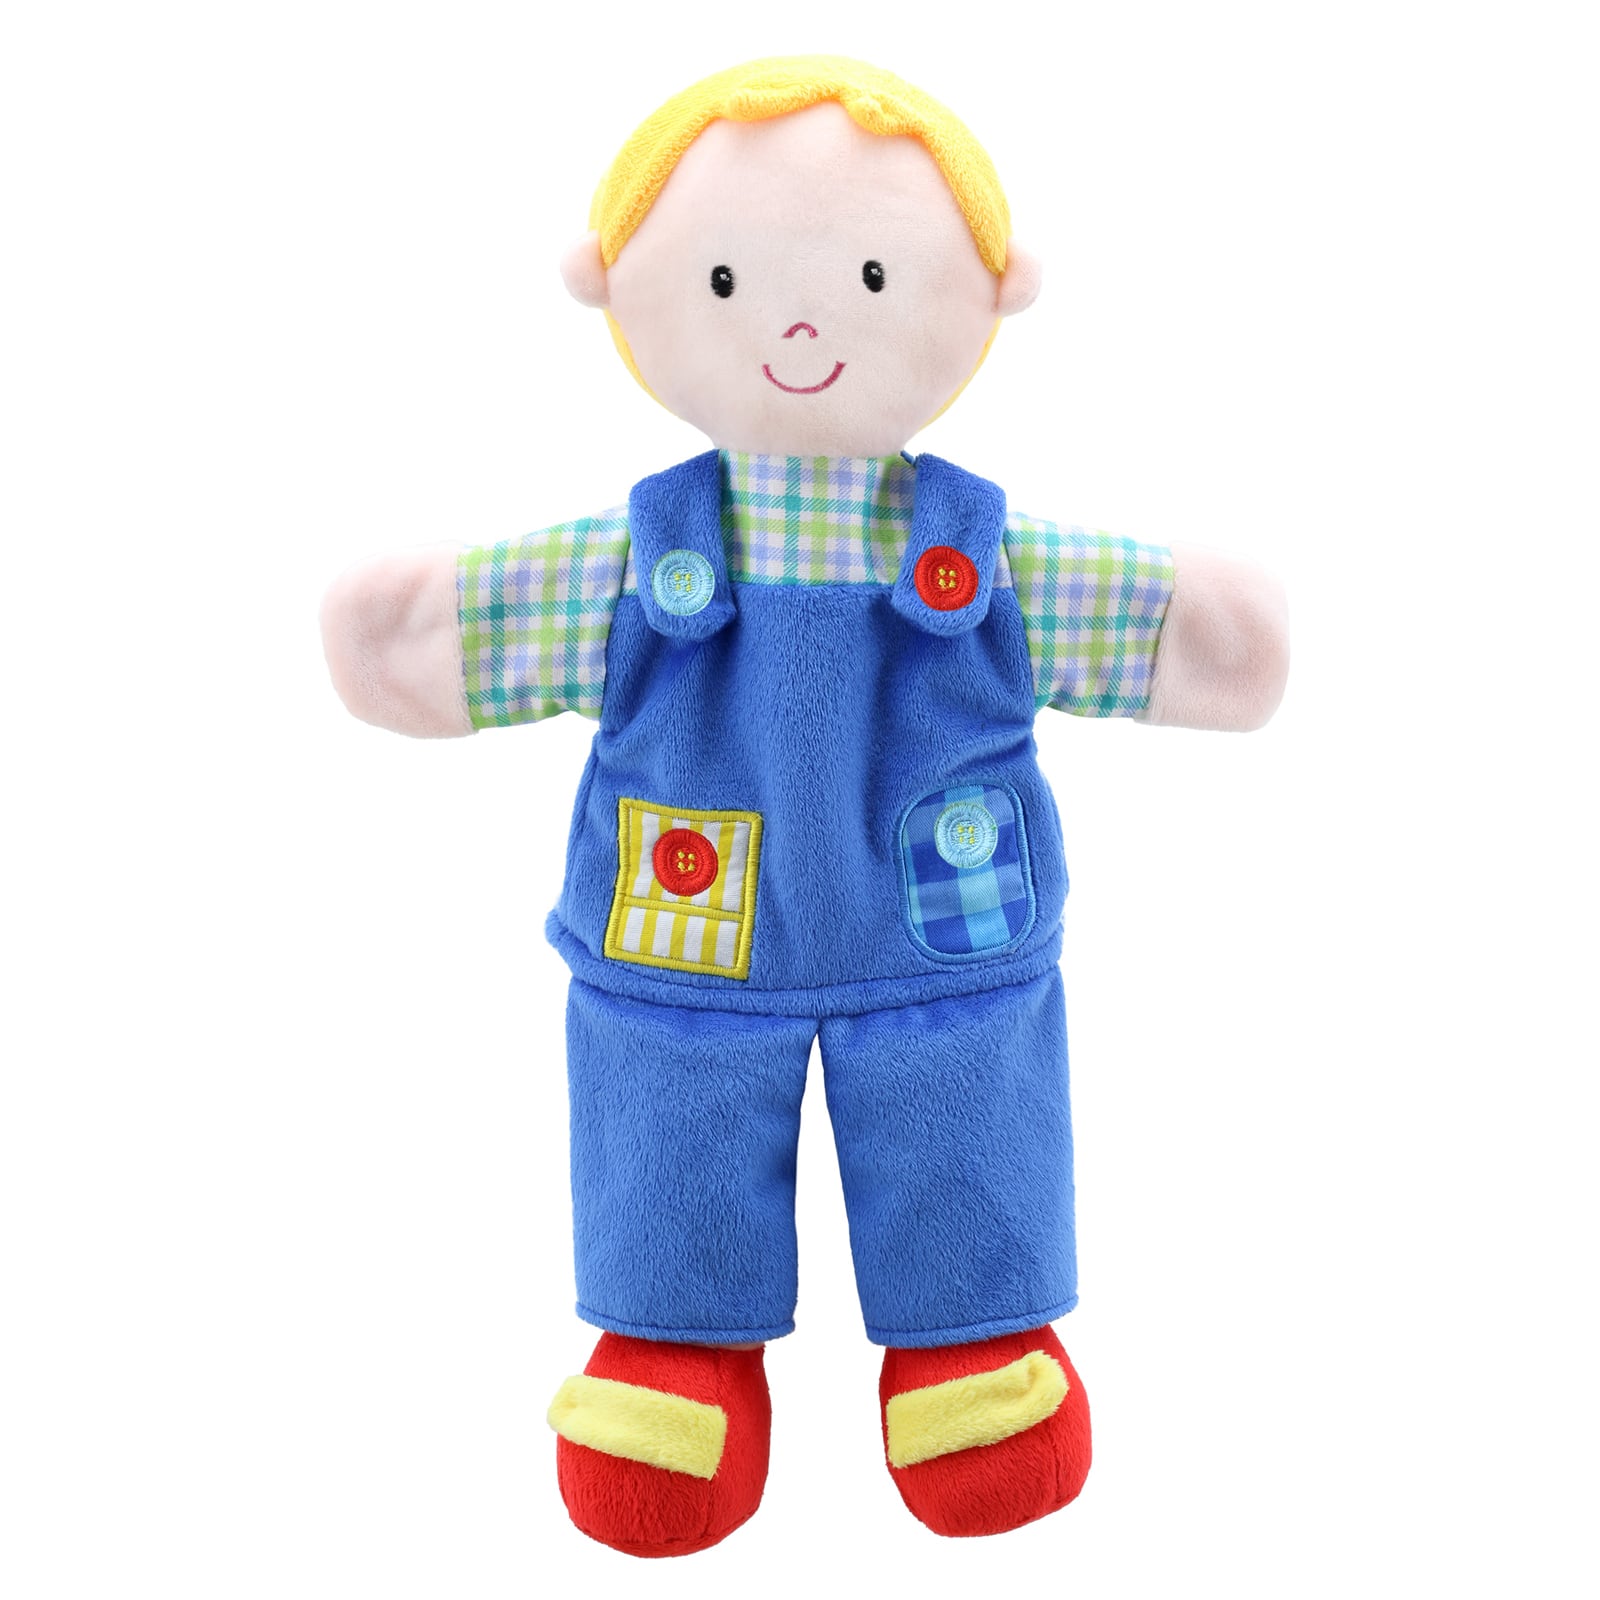 The Puppet Company® Boy in Blue Outfit Story Teller Puppet